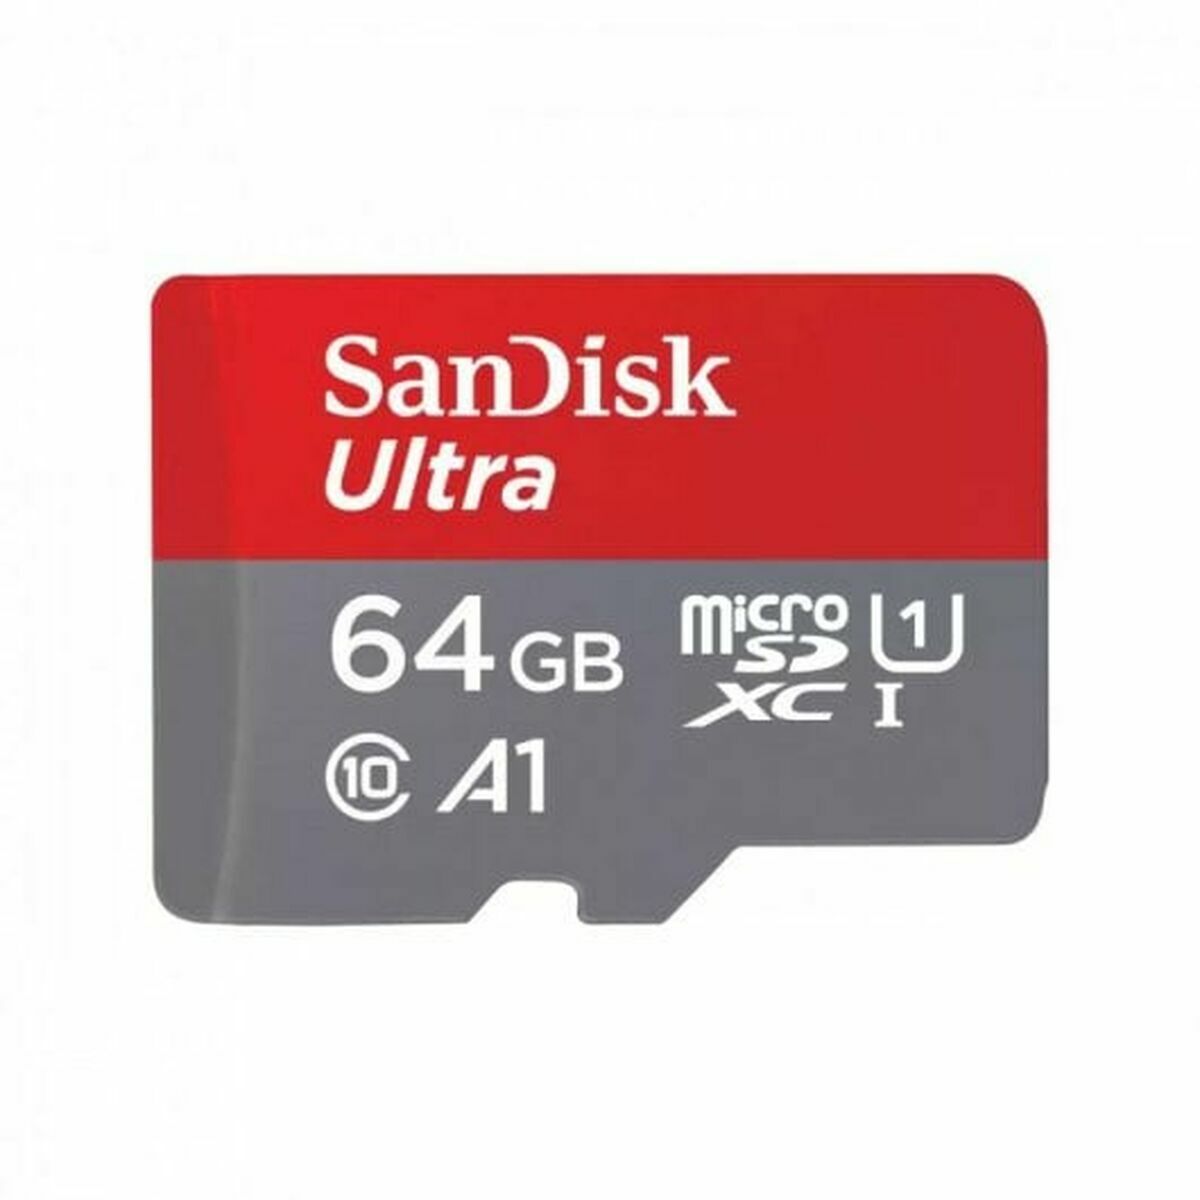 Micro SD Card SanDisk SDSQUAB-064G-GN6MA, SanDisk, Computing, Data storage, micro-sd-card-sandisk-sdsquab-064g-gn6ma, Brand_SanDisk, category-reference-2609, category-reference-2803, category-reference-2813, category-reference-t-19685, category-reference-t-19909, category-reference-t-21355, category-reference-t-25632, computers / components, Condition_NEW, Price_20 - 50, Teleworking, RiotNook